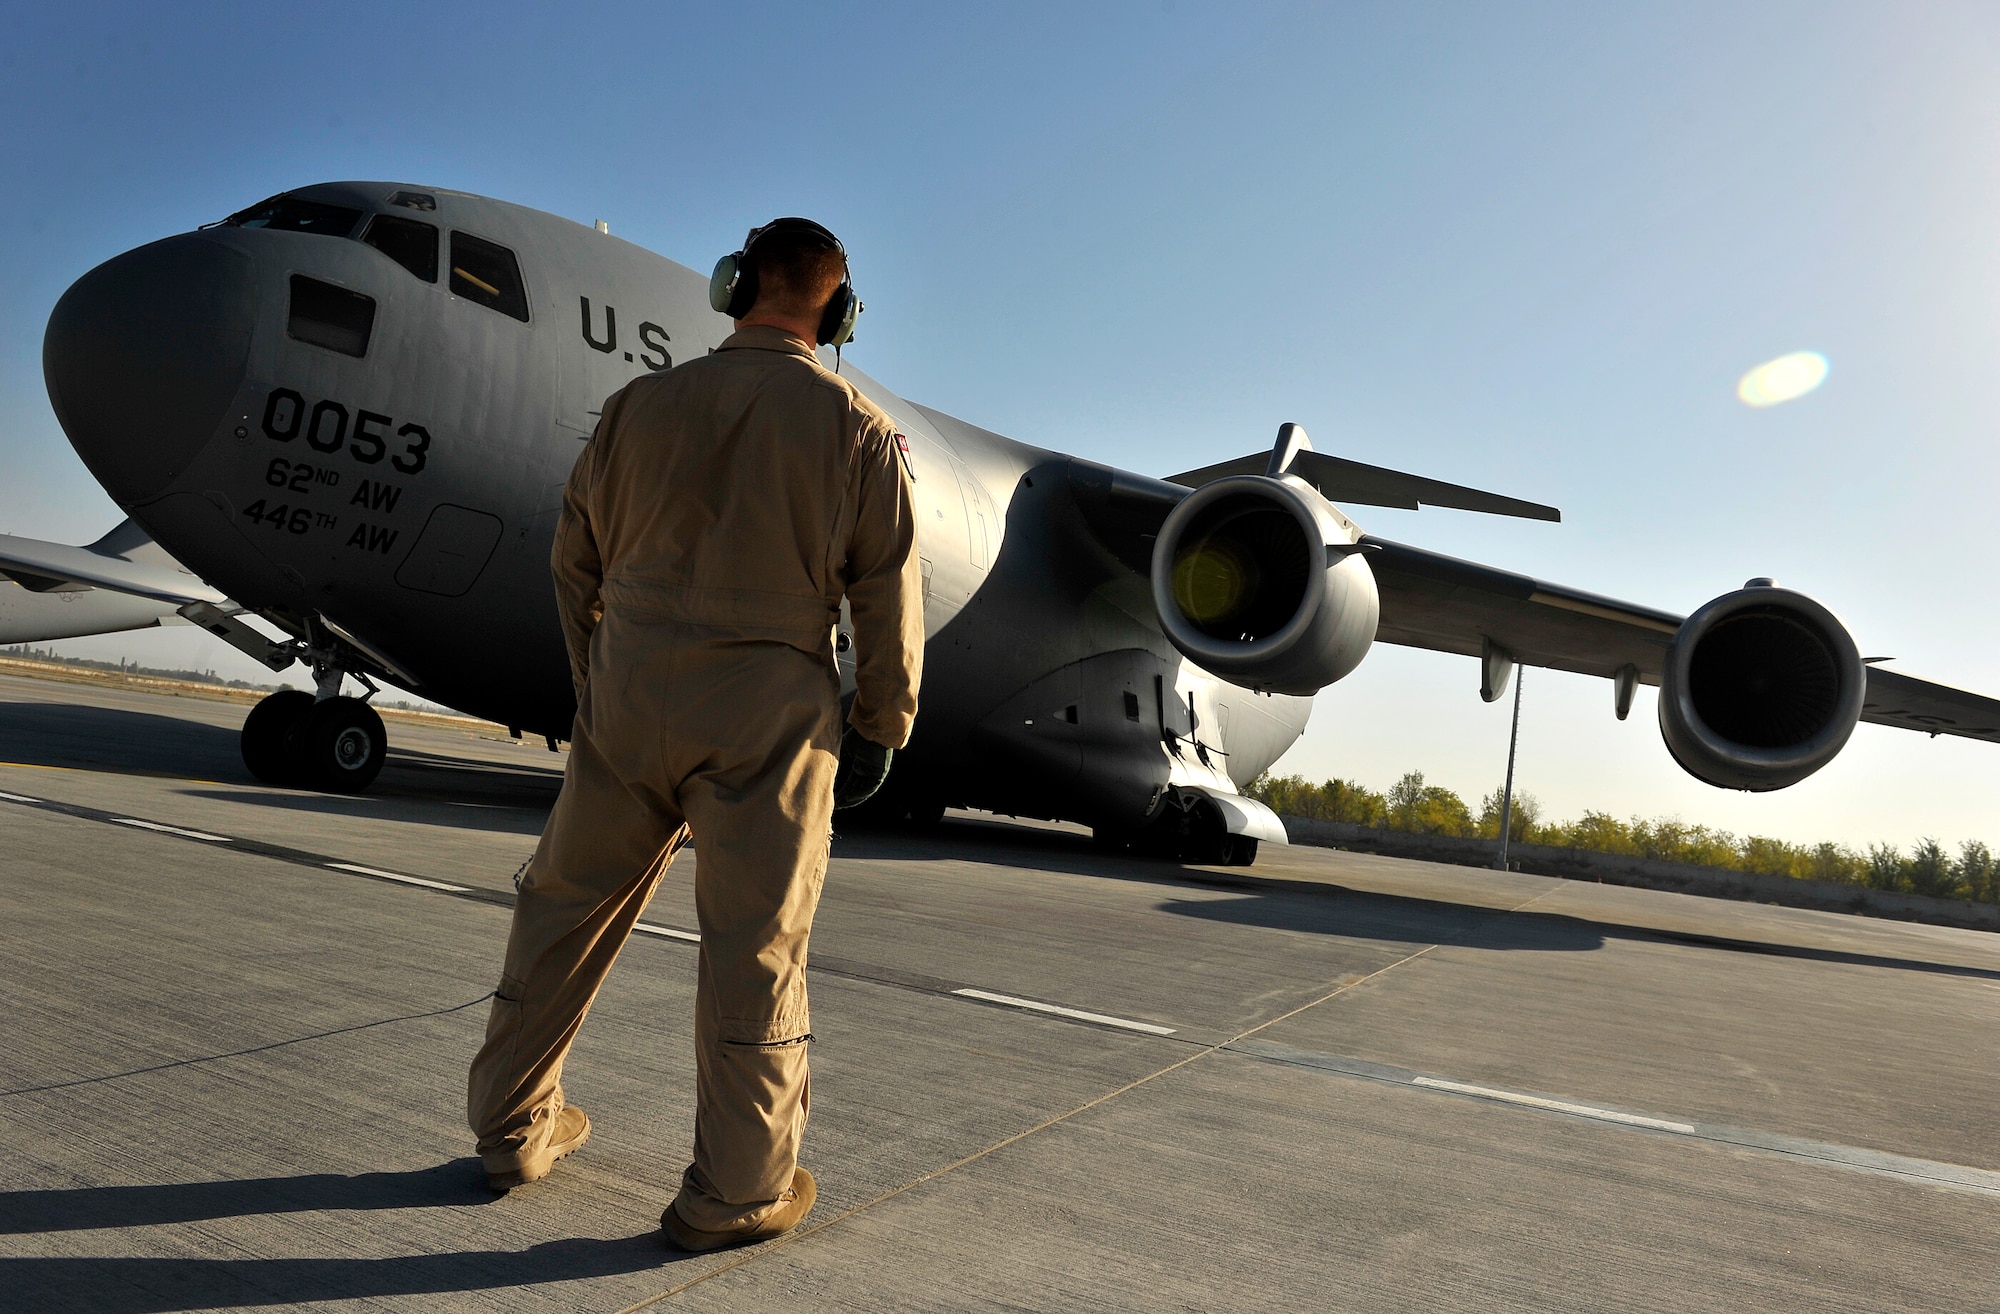 U.S. Air Force Staff Sgt. James Harp, C-17 Globemaster III Loadmaster, performs engine start-up procedures with the onboard crew during a redeployment mission headed for Afghanistan, Sept. 11, 2012. Sgt. Harp is currently part of the 817th Expeditionary Airlift Squadron, deployed to the Transit Center at Manas, Kyrgyzstan. The 817th and their C-17s are an integral piece of the redeployment mission and help to move cargo within the AOR and transport passengers during redeployment missions. 


(U.S. Air Force photo/Staff Sgt. Clay Lancaster/Released)